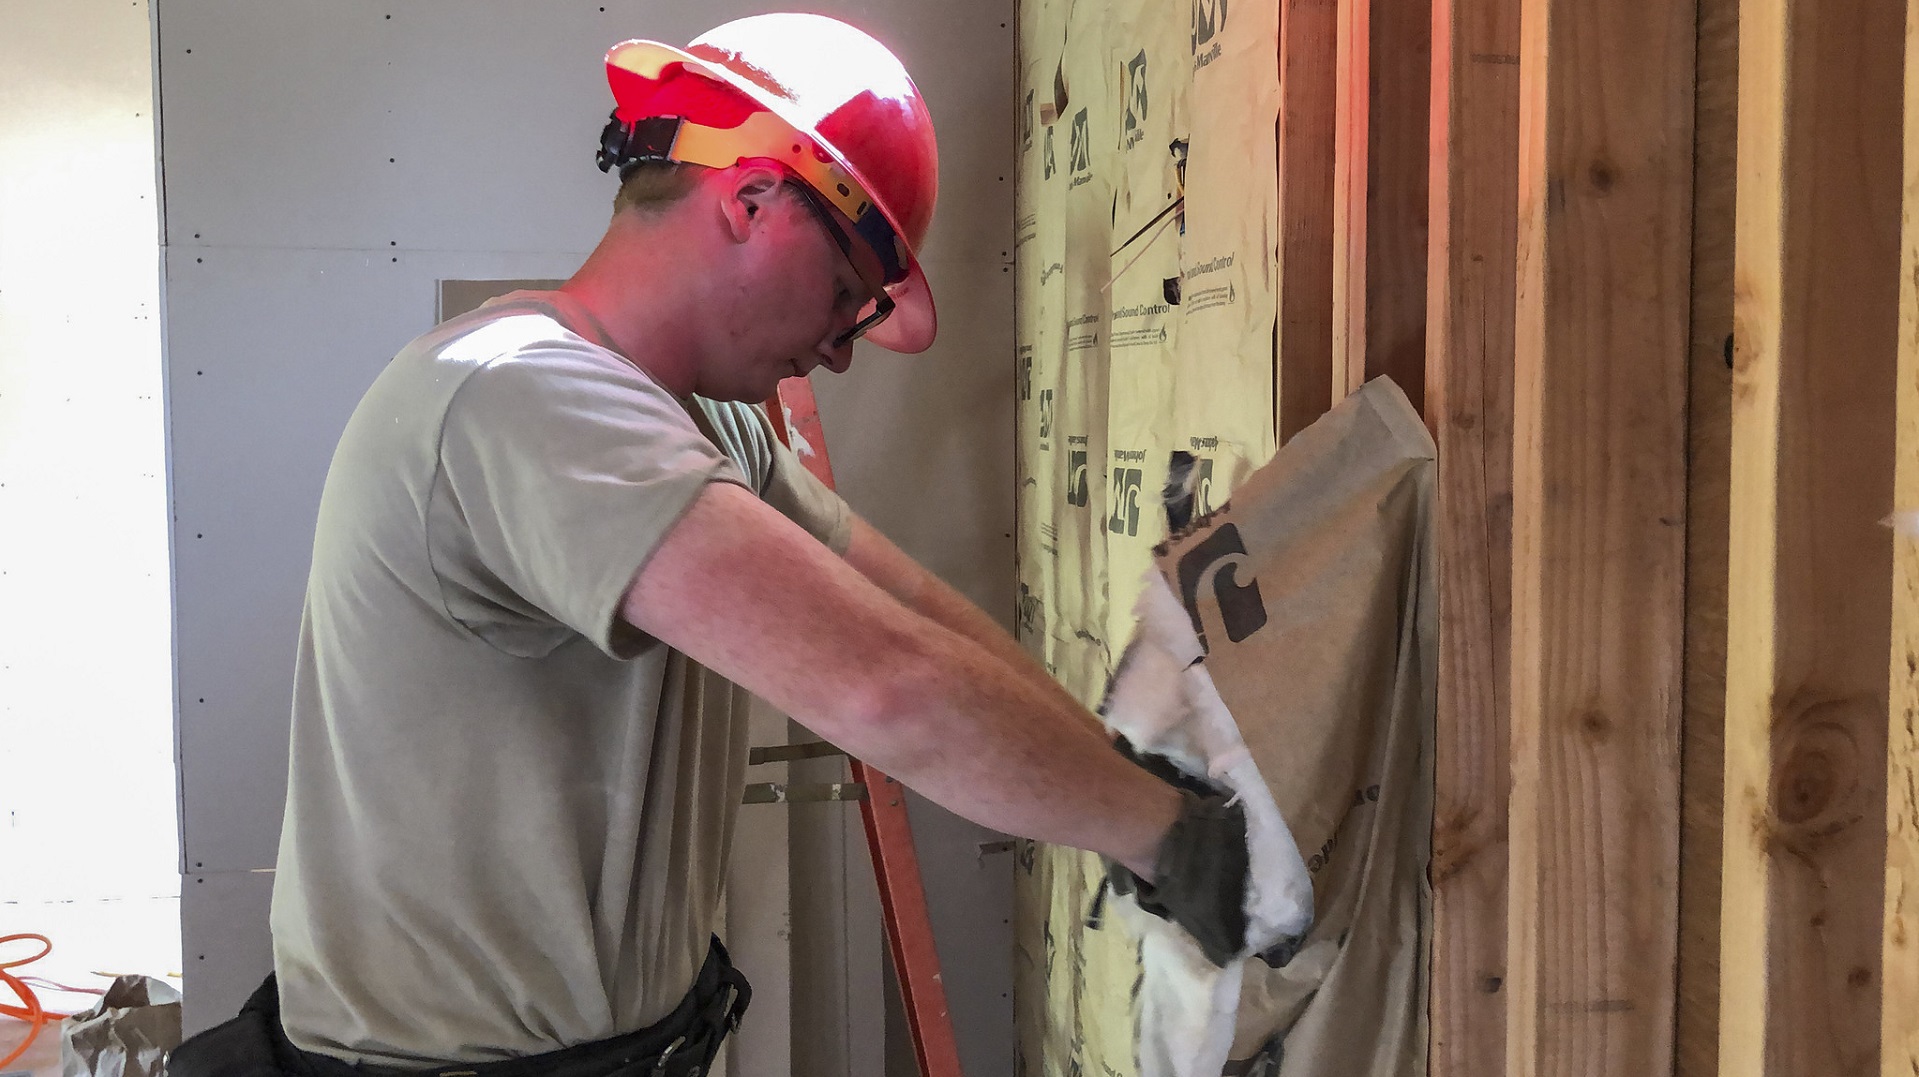 Installing insulation is a way to insulate homes and tackle climate change and rising energy bills